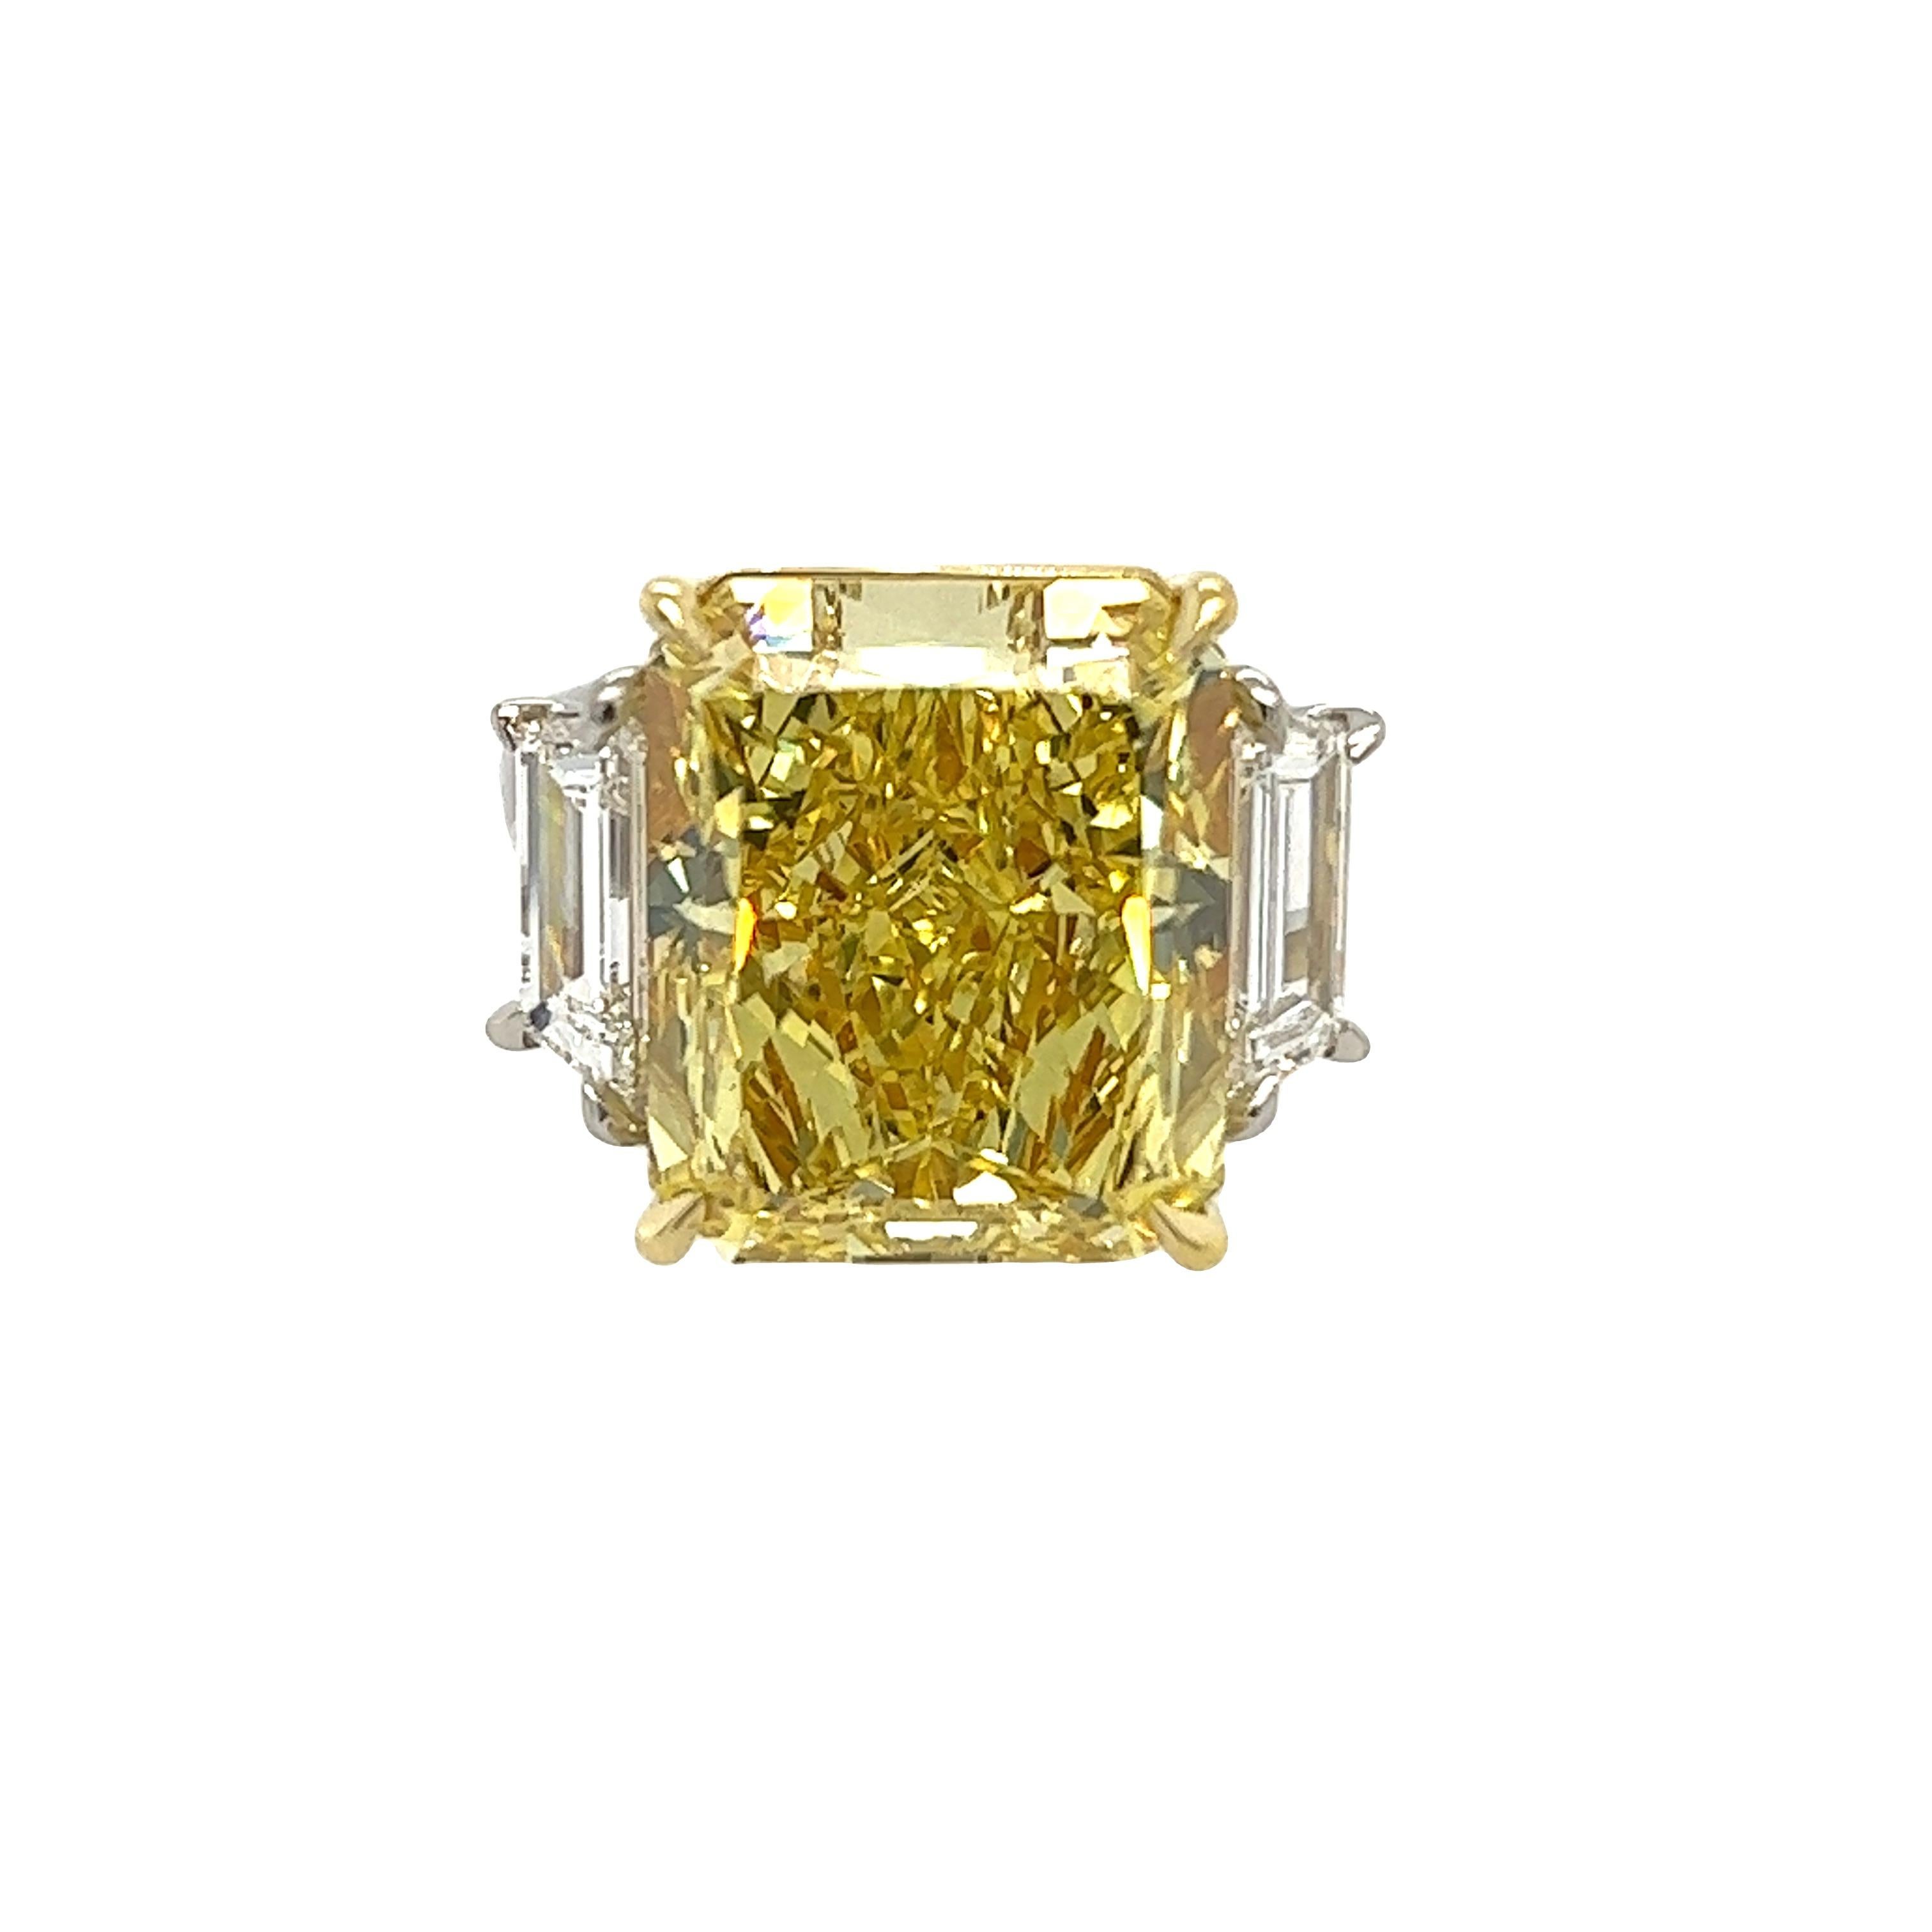 Rosenberg Diamonds & Co. 15.38 carat Radiant Cut Fancy Intense Yellow VS2 clarity is accompanied by a GIA certificate. This extraordinary radiant cut is set in a handmade platinum & 18k yellow gold setting with perfectly matched pair of step cut